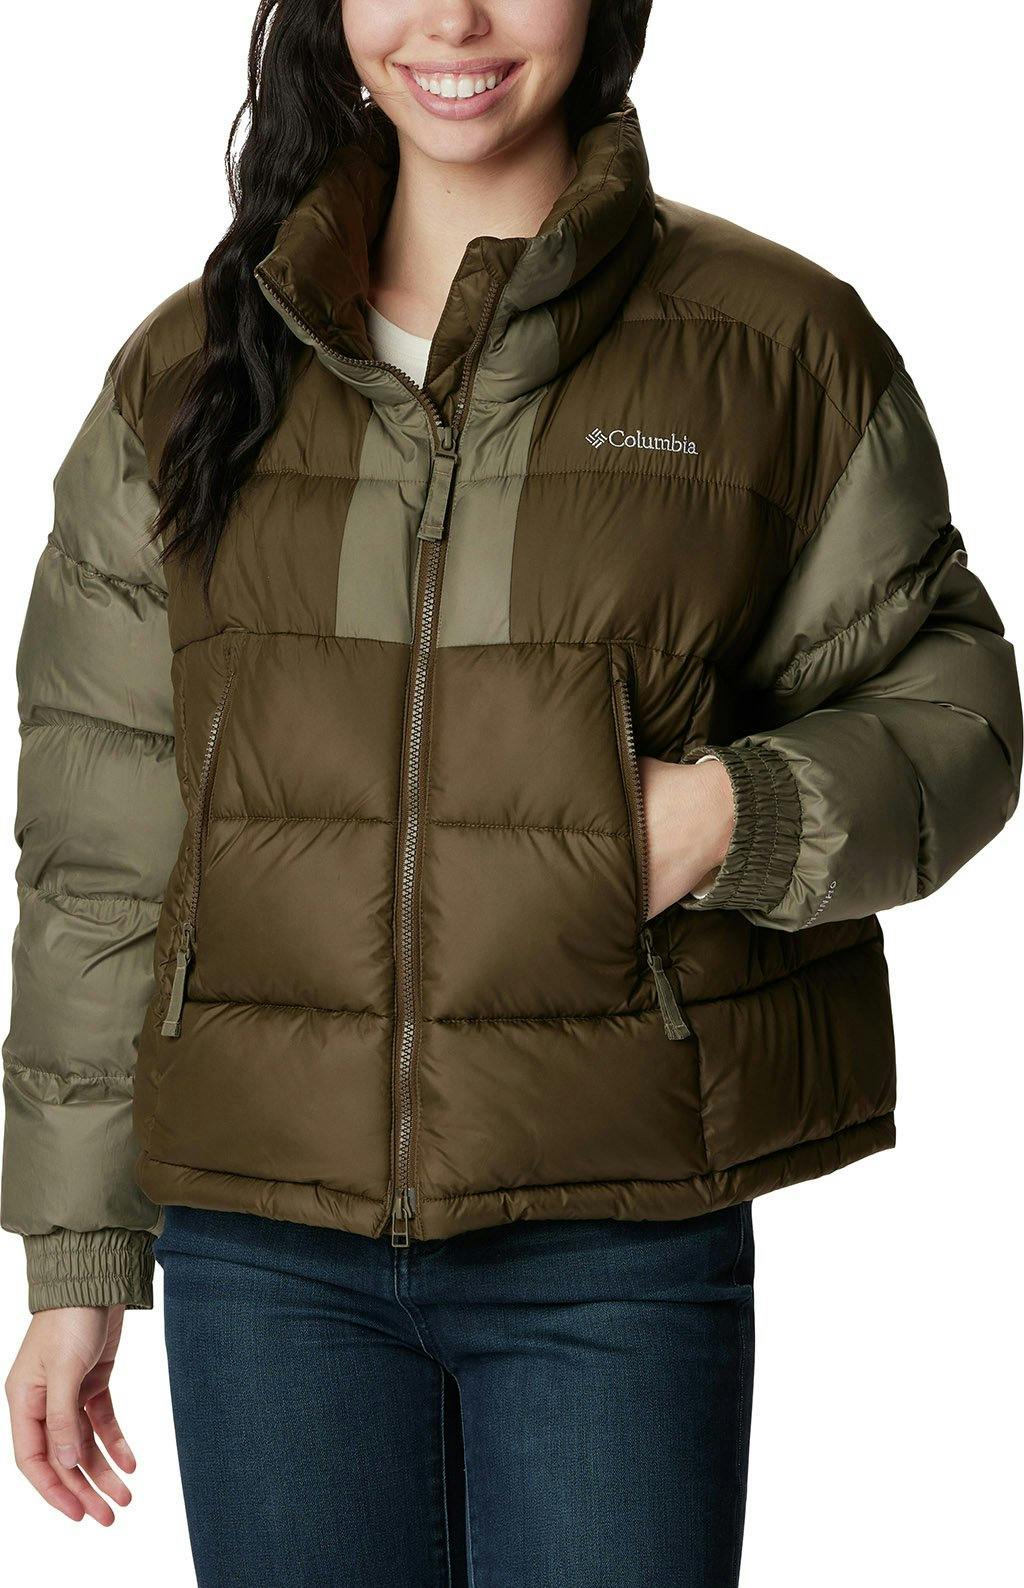 Product image for Pike Lake II Cropped Jacket - Women's